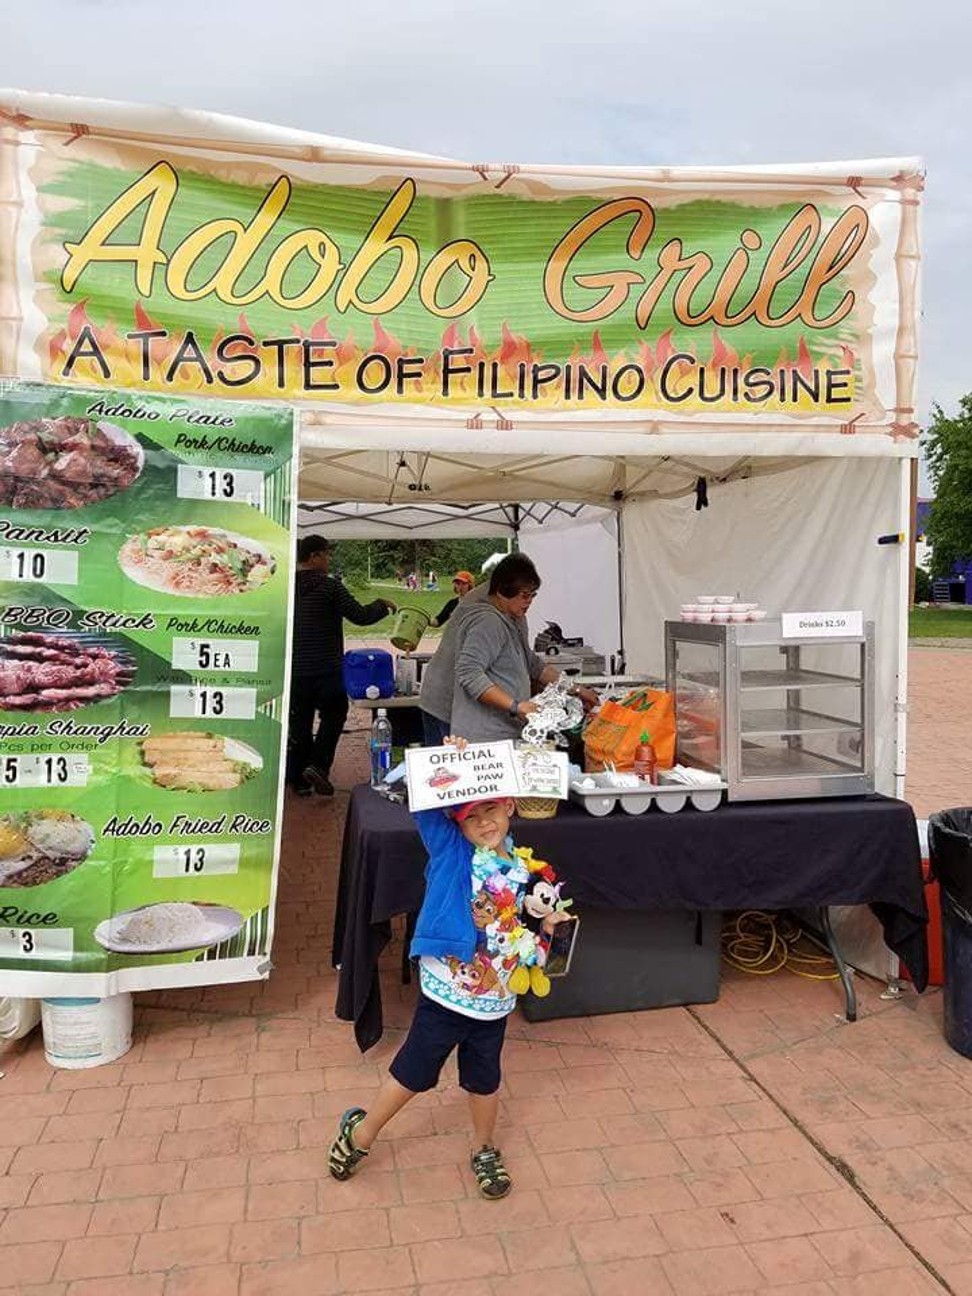 Jerry Manolo’s family runs Jeepney by Adobo Grill, a food truck and catering business serving fusion Philippine dishes. Photo: Handout